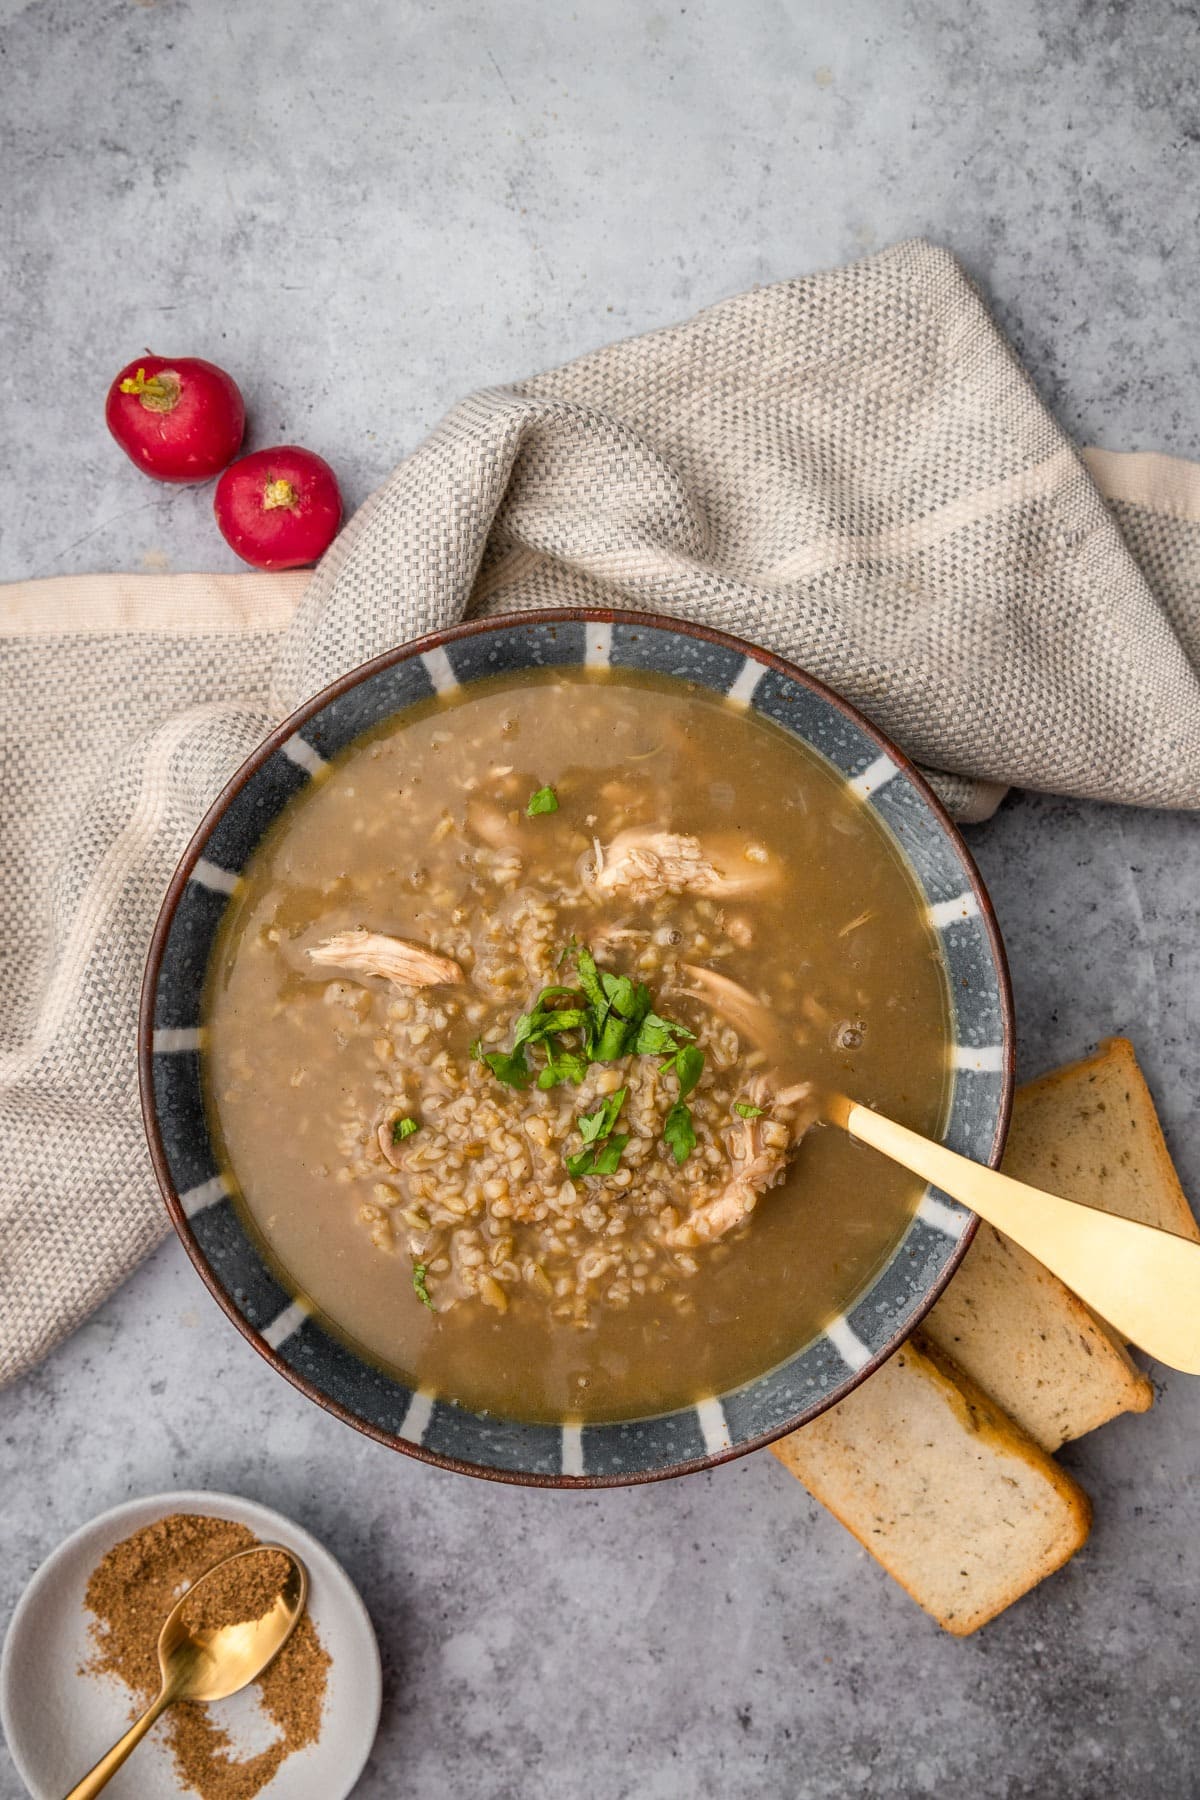 Freekeh soup combined with chicken and spices in a bowl, with a spoon and served with bread- top view